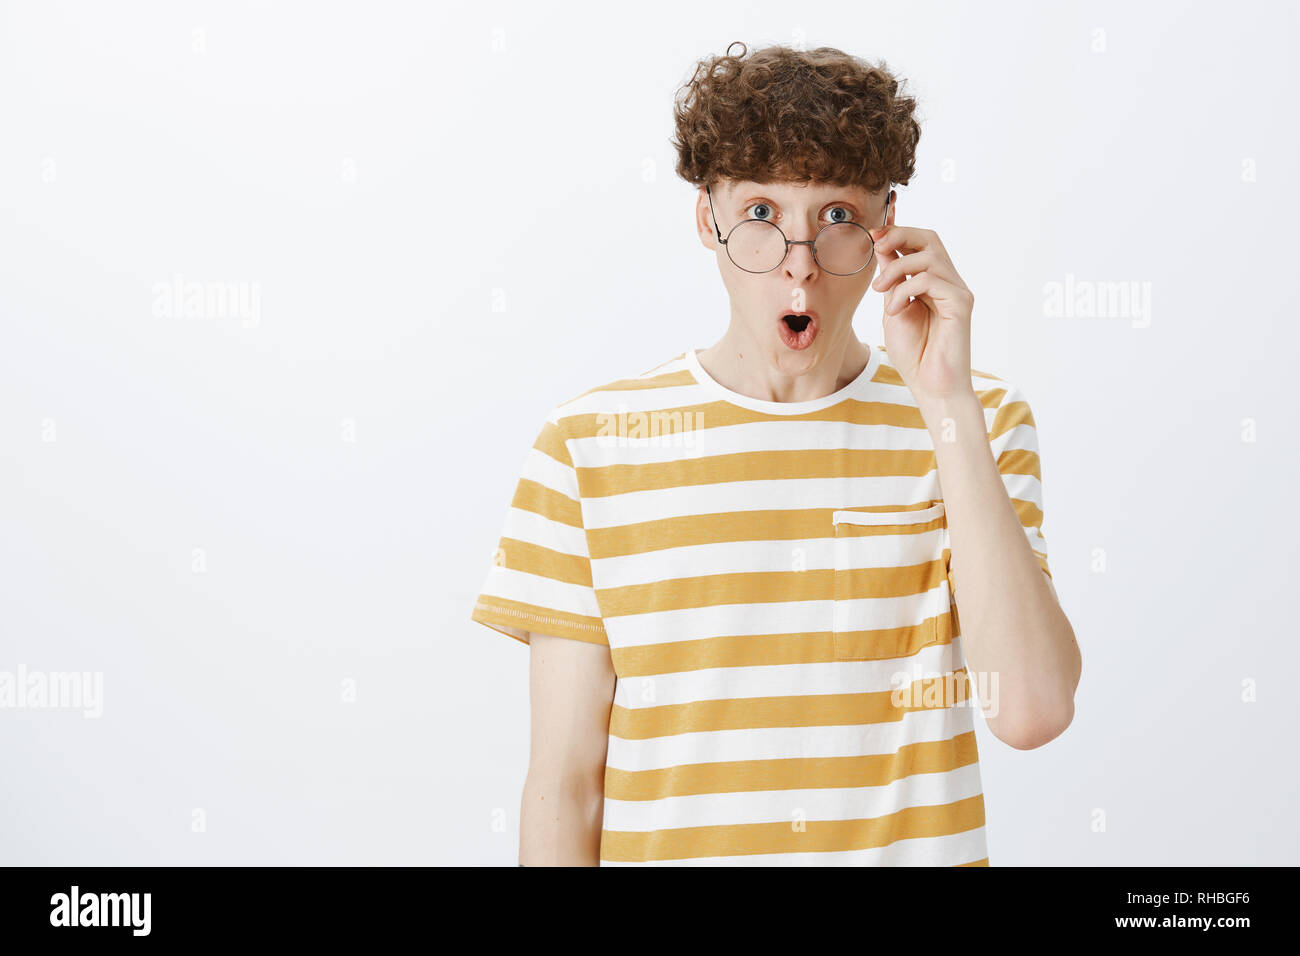 Amazed and amused funny guy with curly hairstyle and tattoo dropping jaw yelling wow and taking off glasses as being amazed and speechless seing Stock Photo